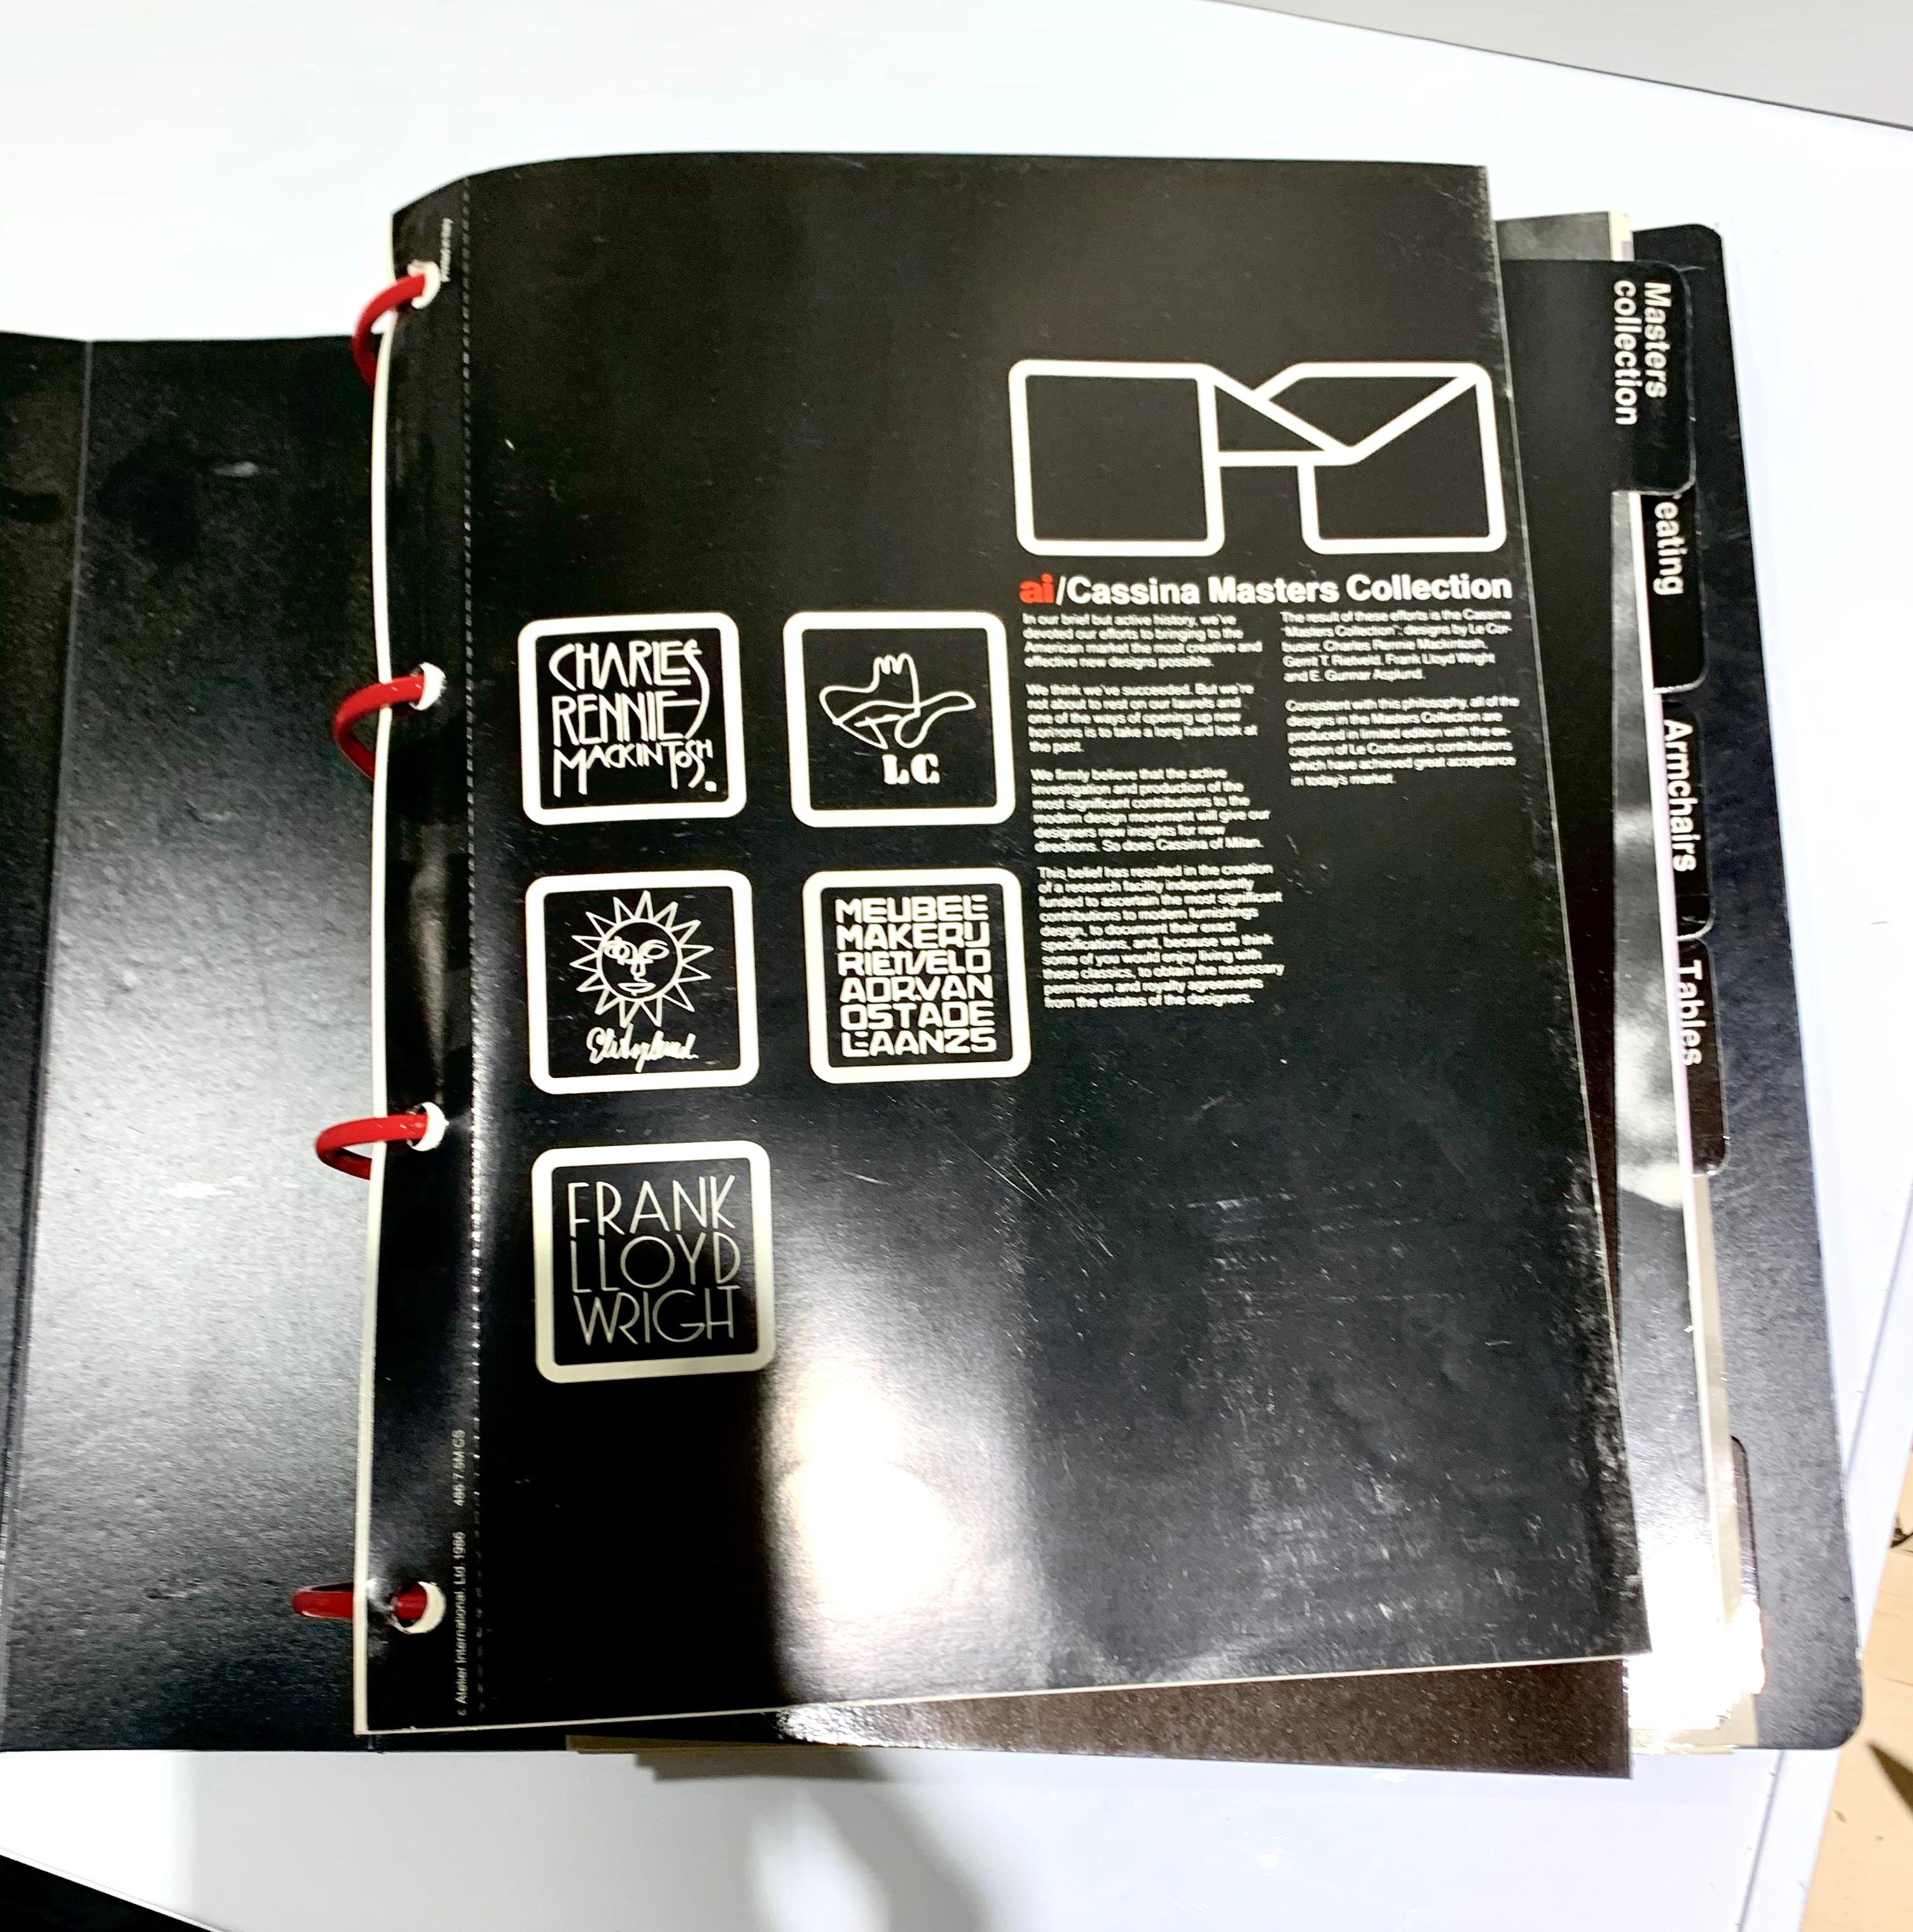 Atelier International Limited & Cassina Trade catalogue Binder, 1988. Rare anthology of Cassina / AI offerings including the Master’s Collection in the mid to late 1980s — a number of Frank Lloyd Wright rarities / limited editions.